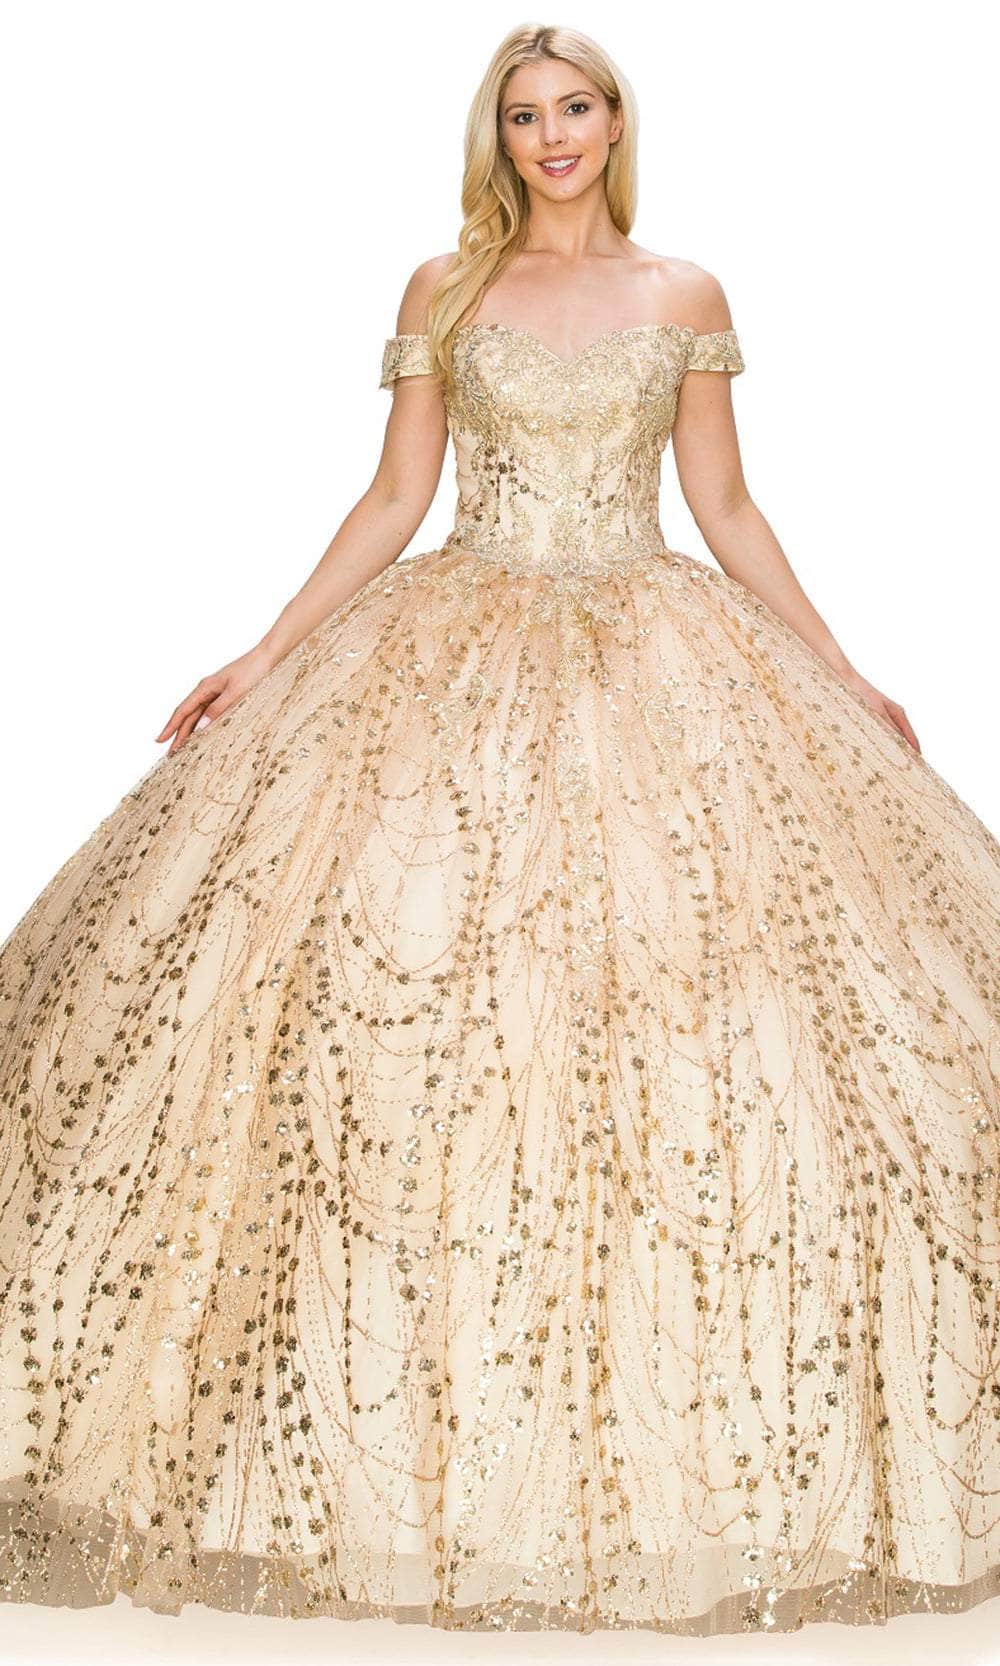 Image of Cinderella Couture 8033J - Embellished Sweetheart Ballgown